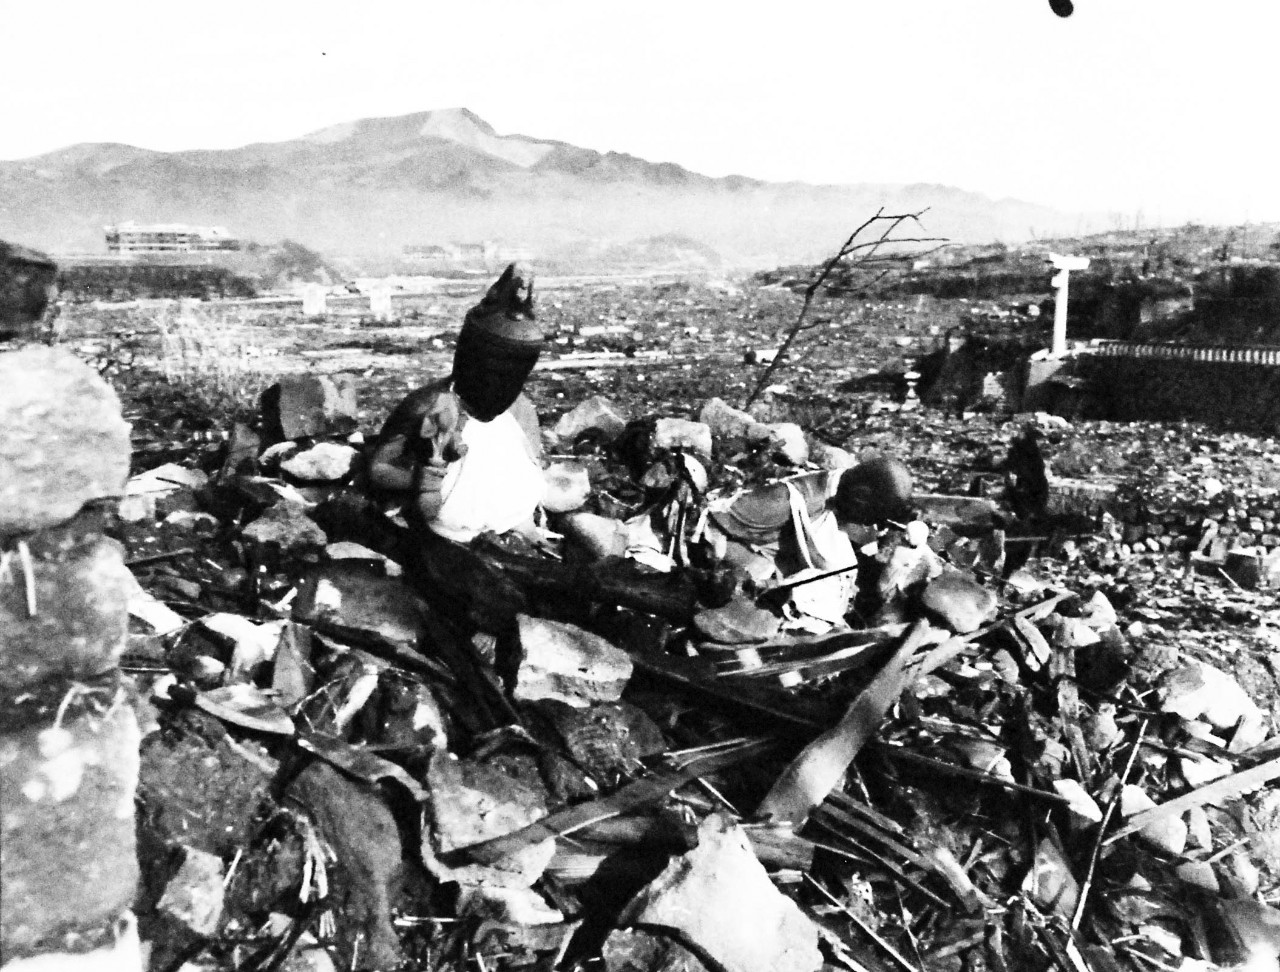 127-GW-1643-137016:     Nagasaki, Japan, 1945.   Battered religious figures stand watch on a hill above a tattered valley.      Photographed by September 24, 1945.        Official U.S. Marine Corps Photograph, now in the collections of the National Archives.  (2016/10/25).